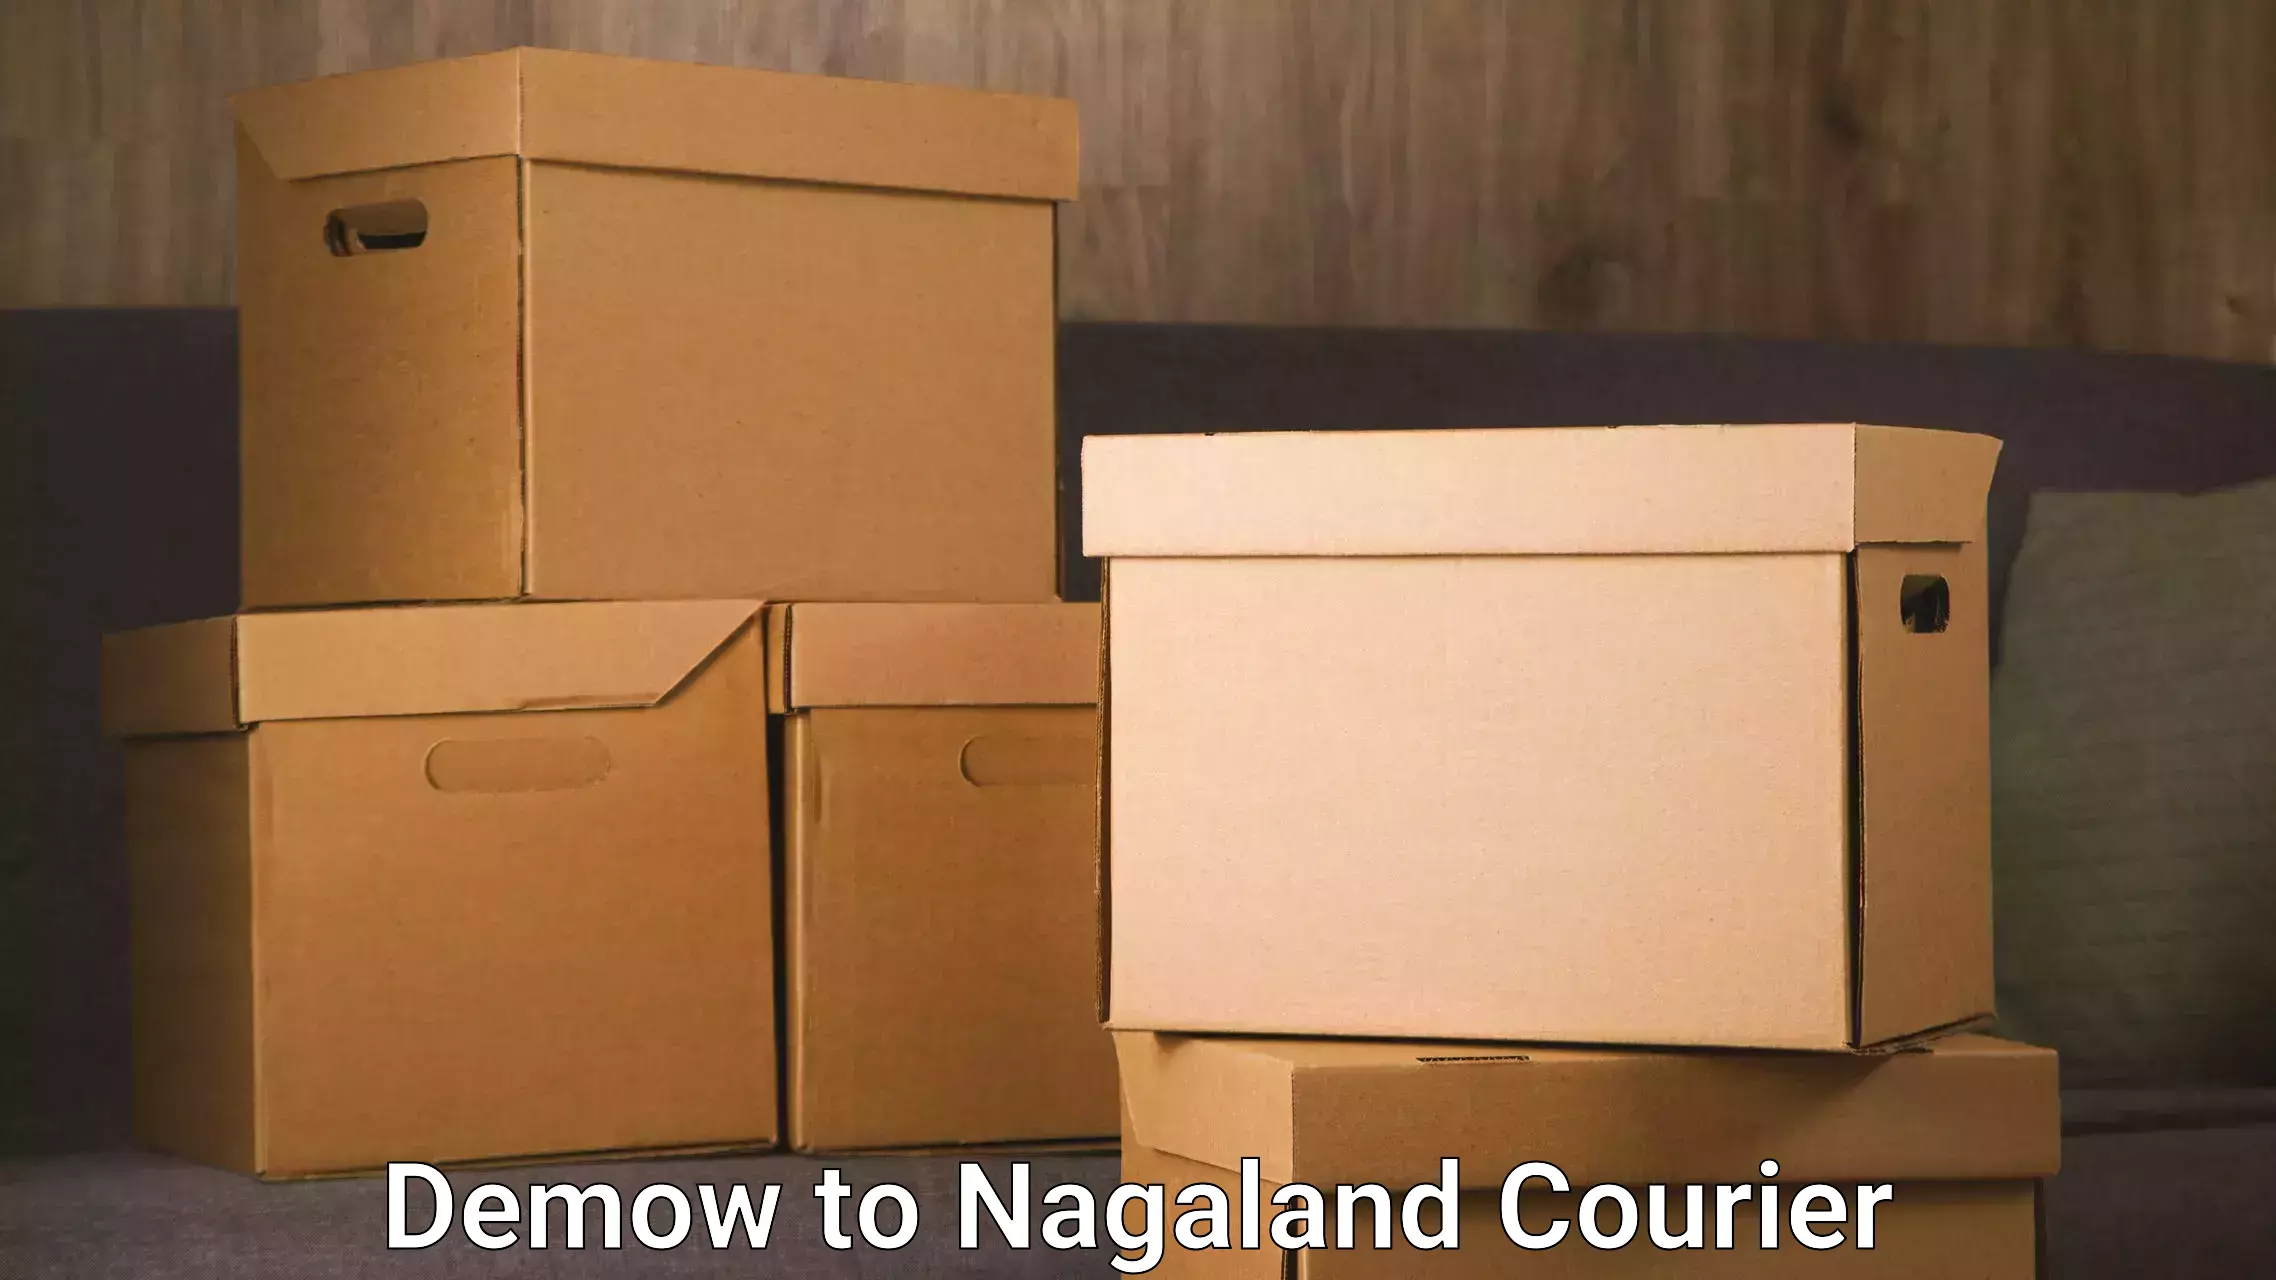 Quality courier partnerships Demow to Nagaland